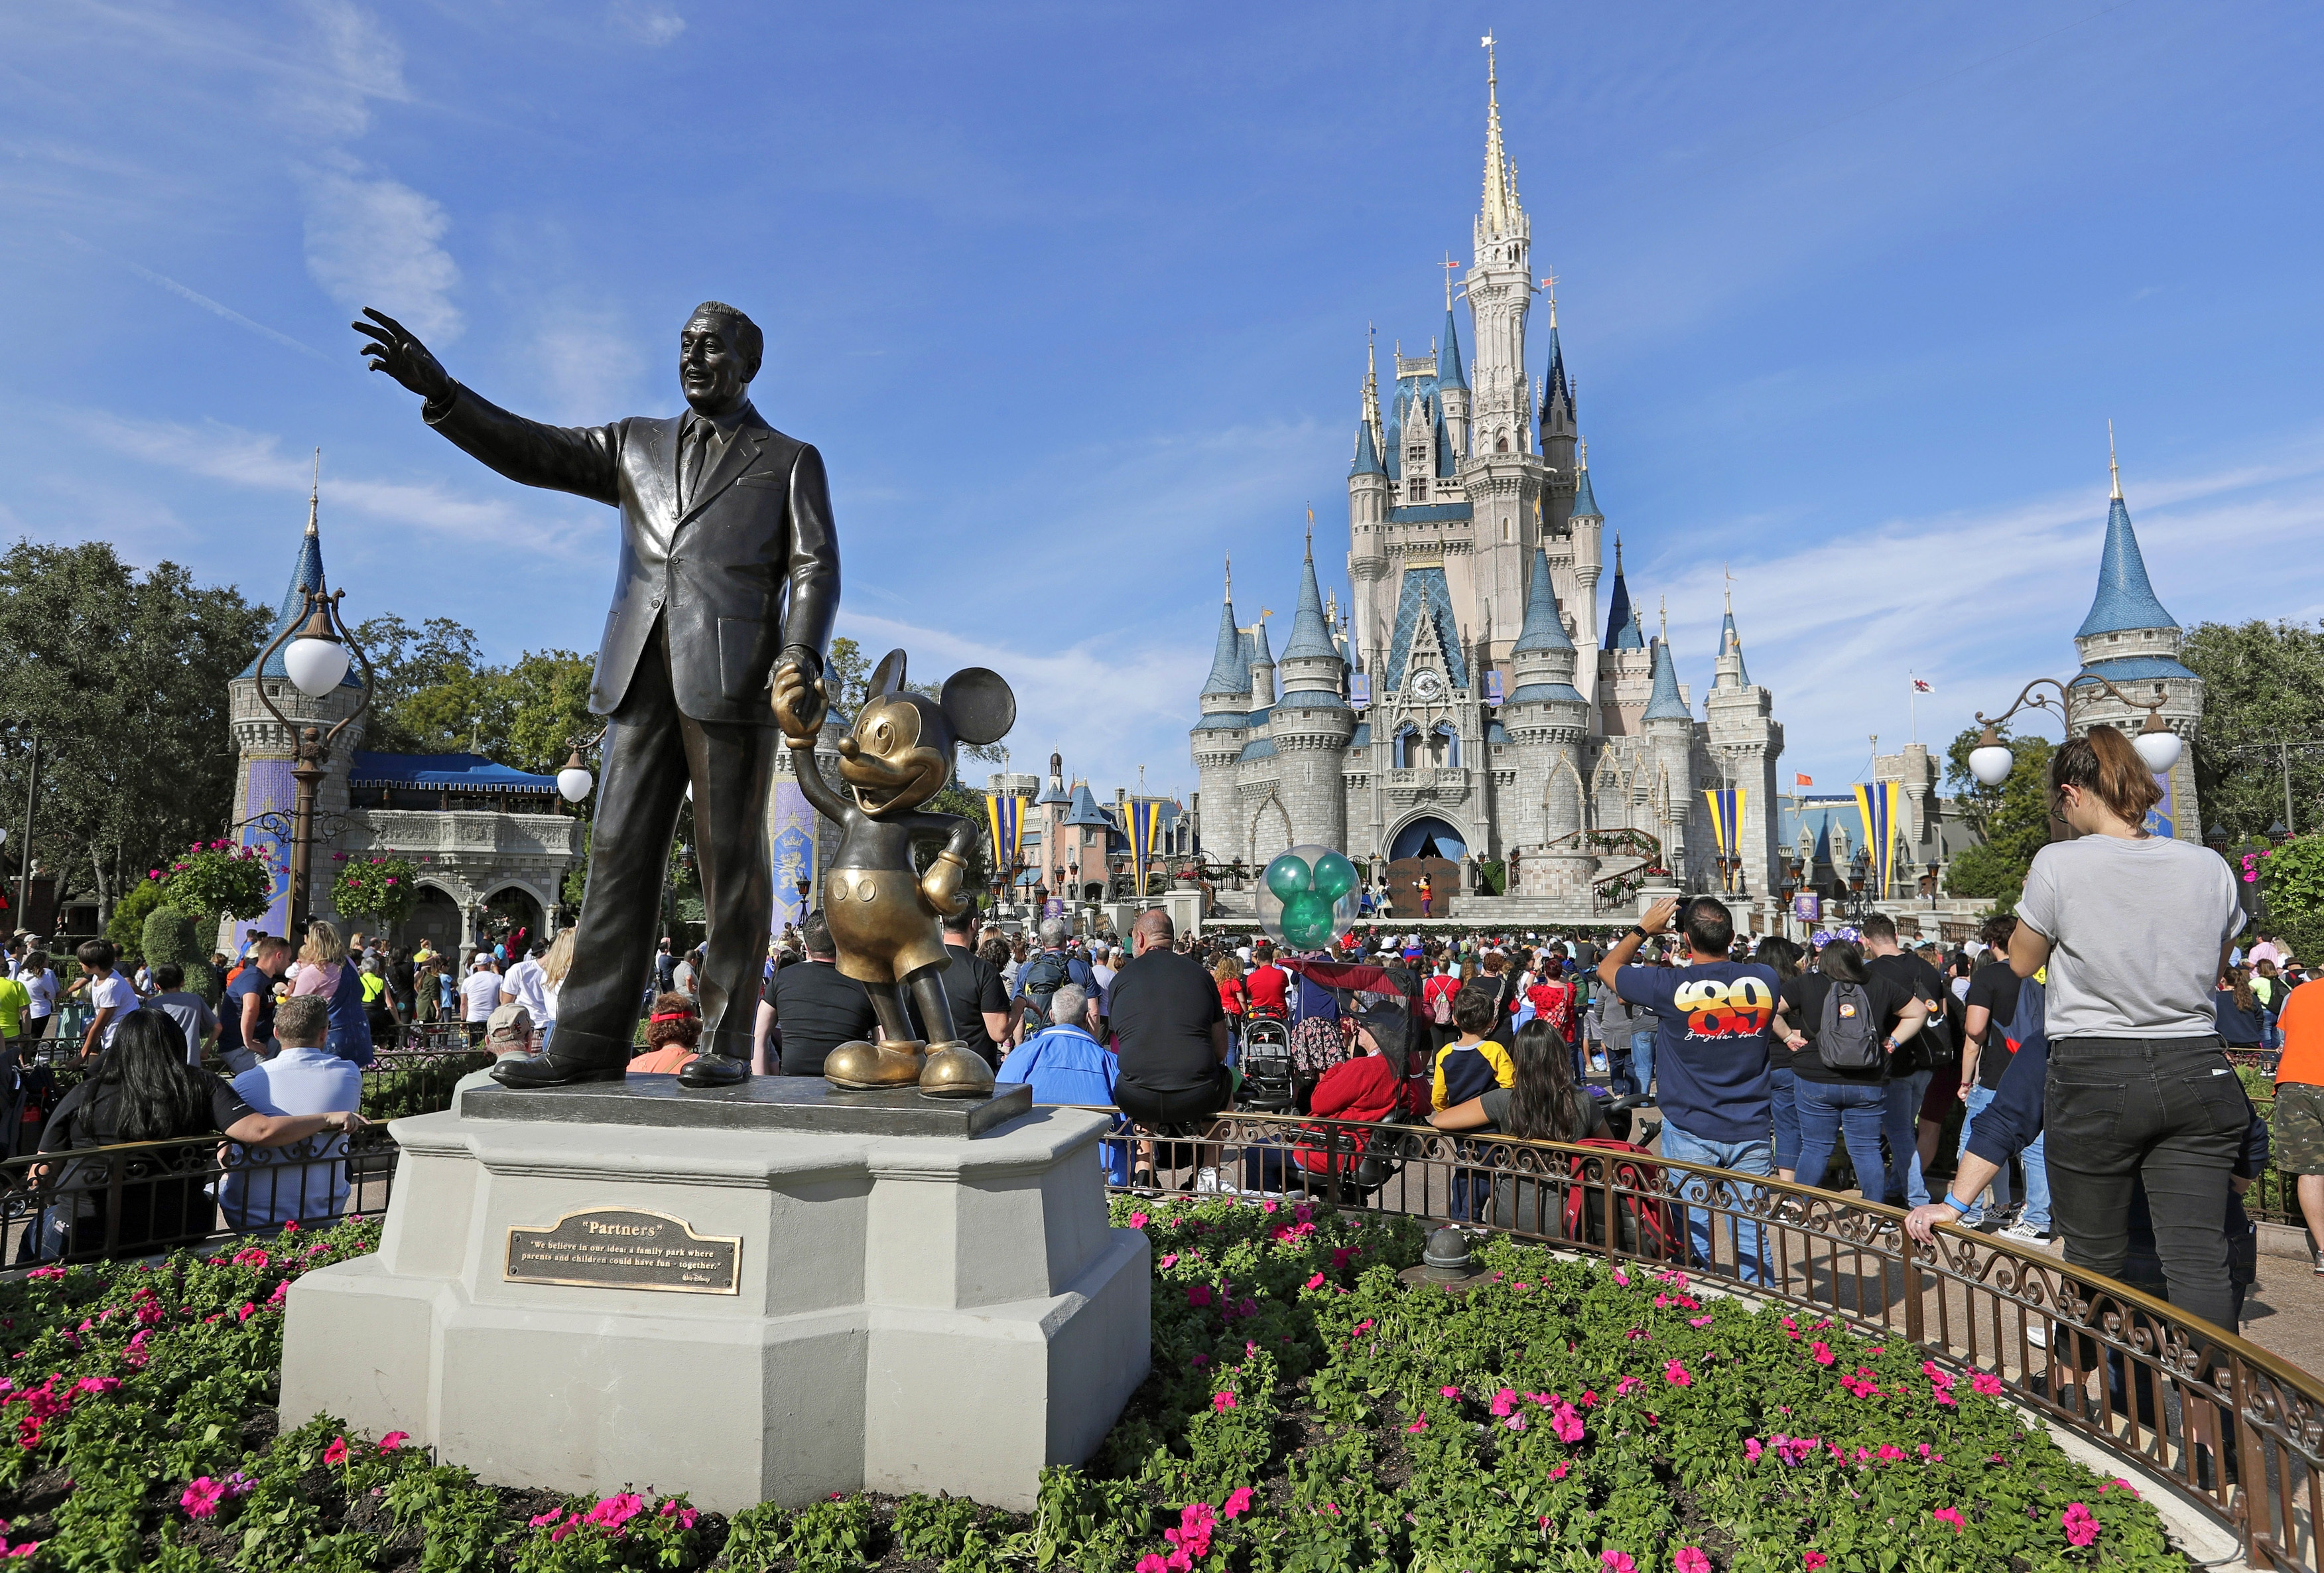 A spokesperson said Disney venues do not tolerate violence after a Florida woman allegedly assaulted a taxi driver over a cigarette.